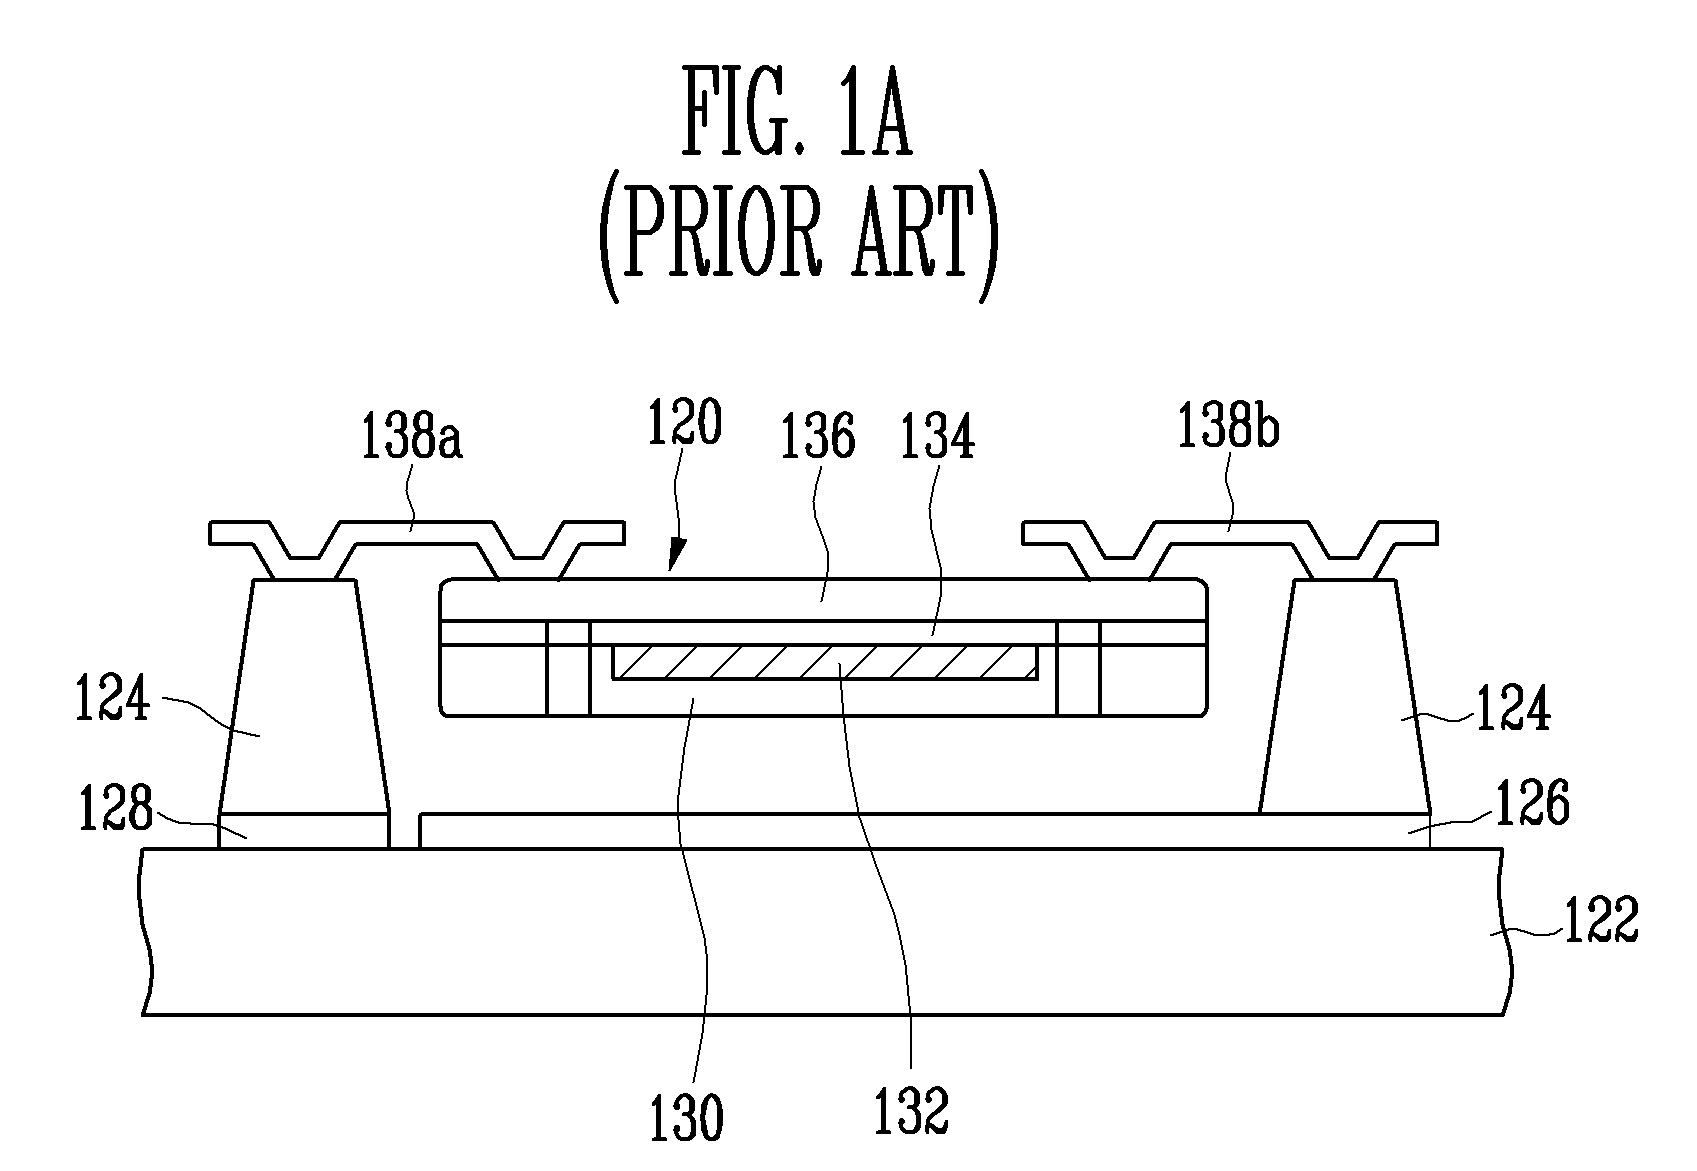 Bolometer and method of manufacturing the same